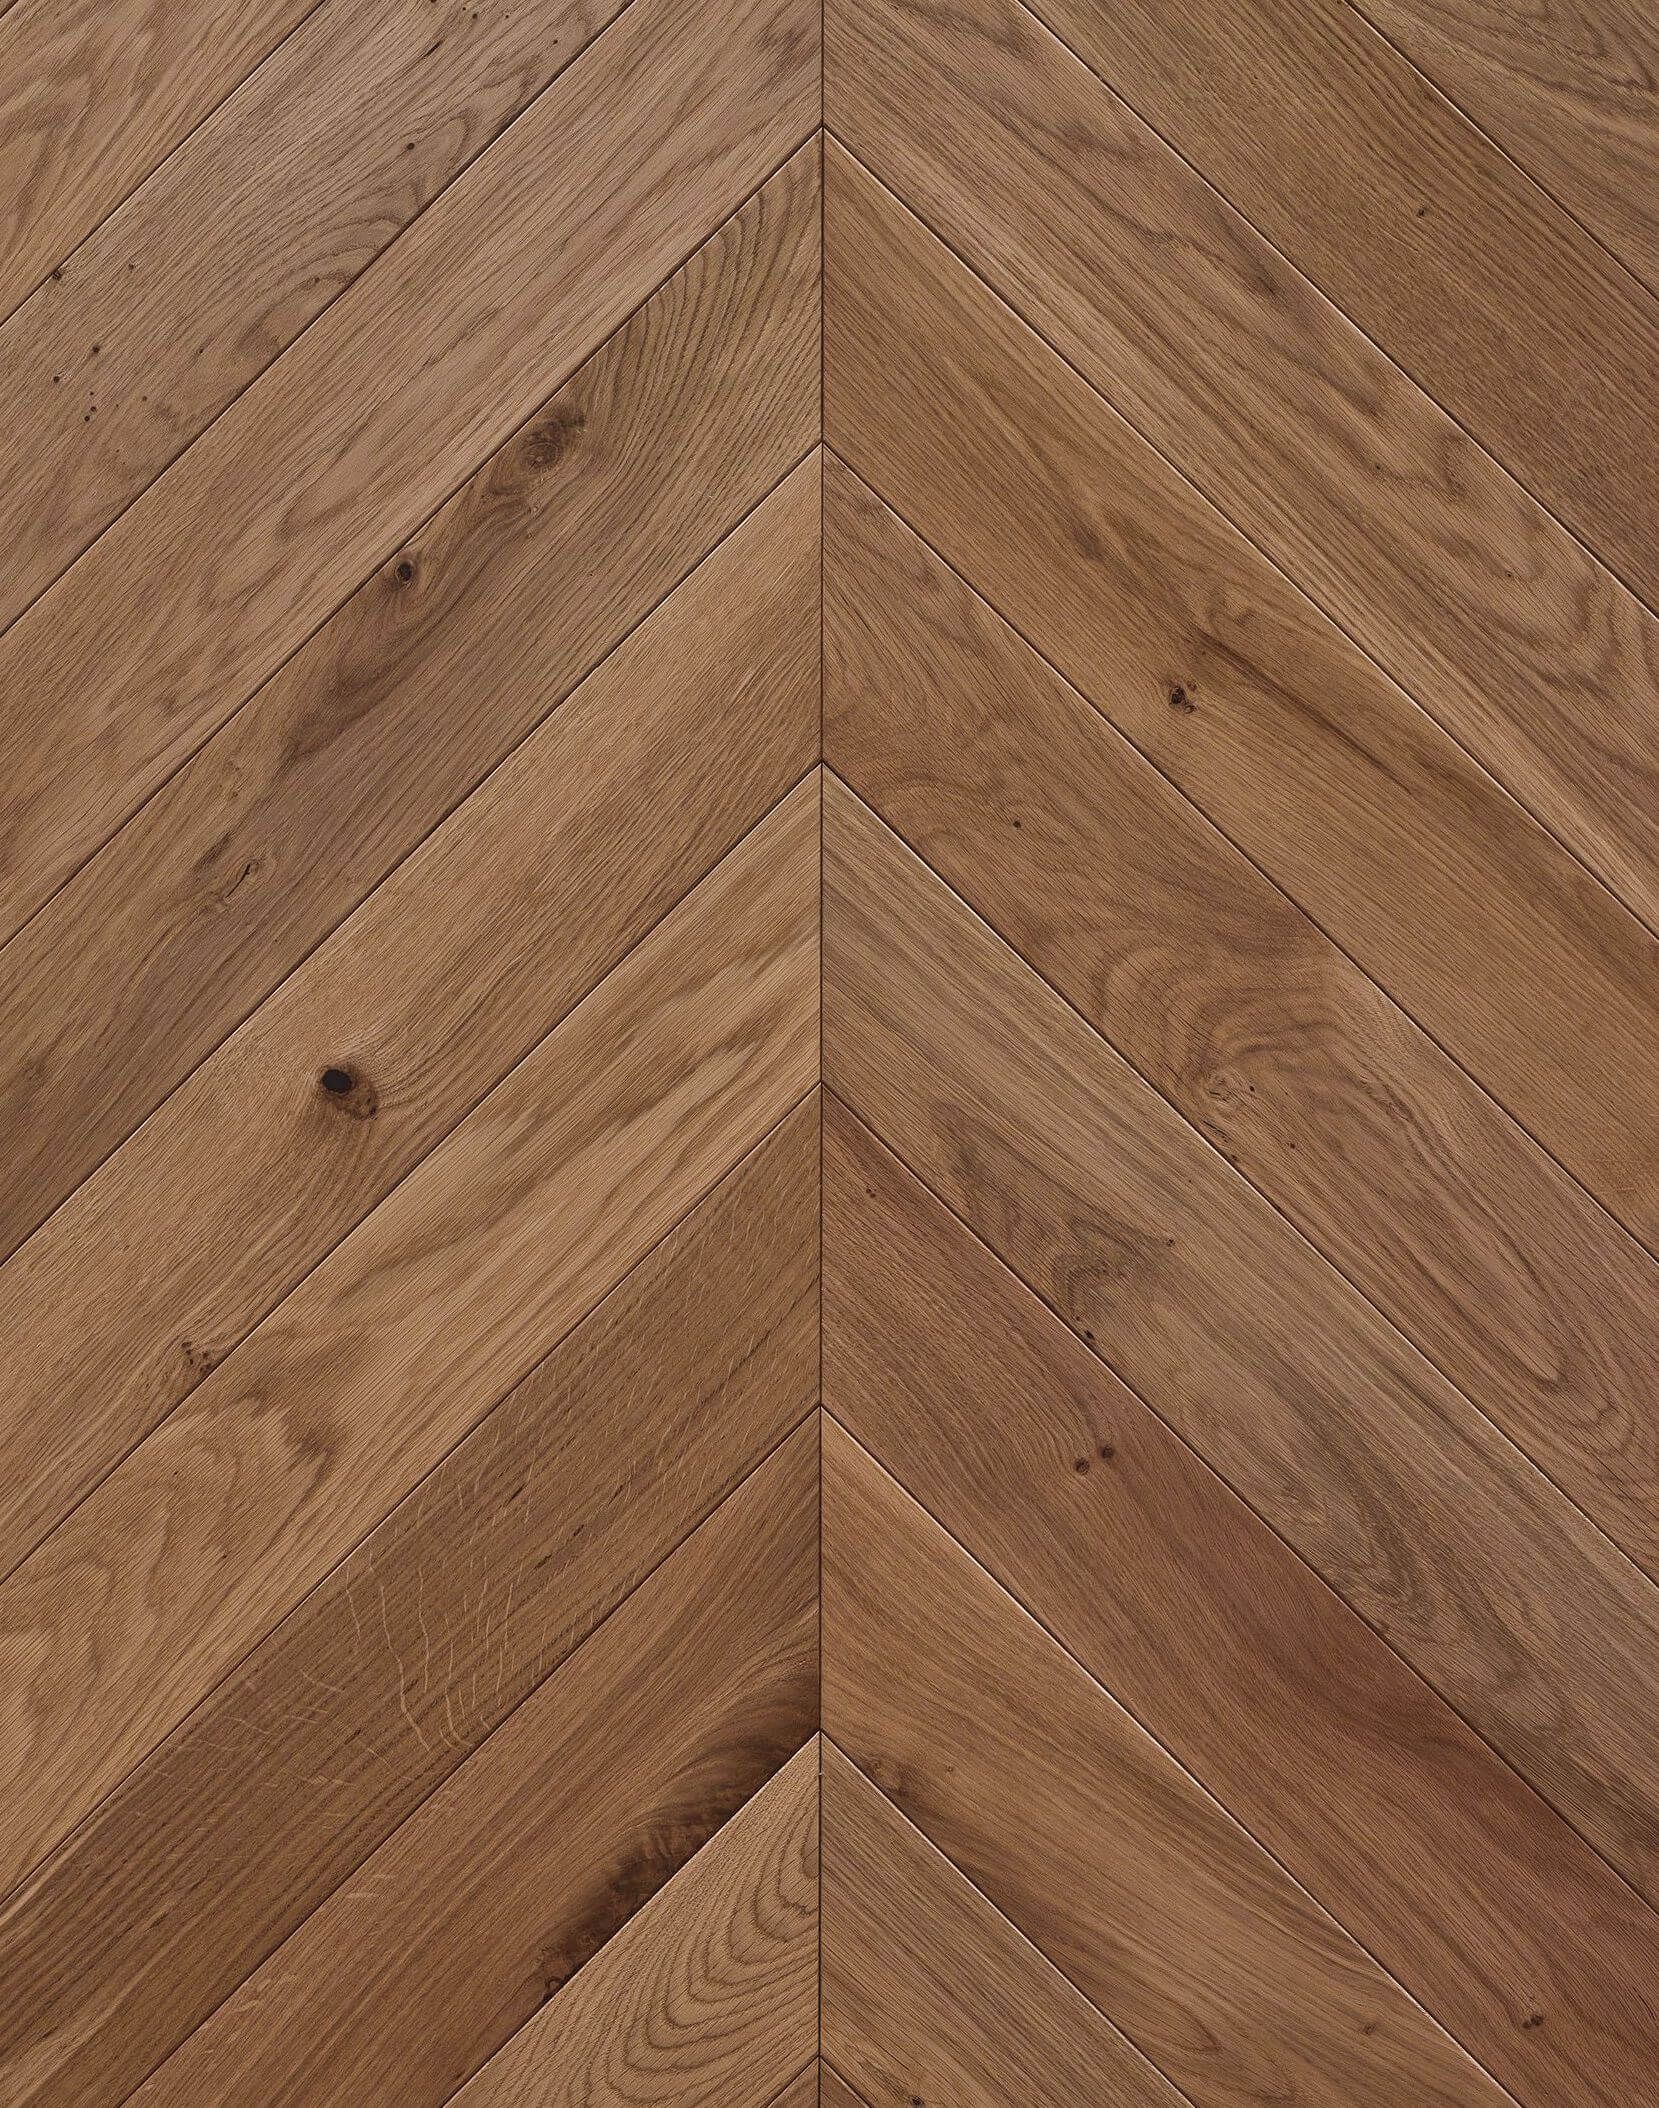 How to make your floor lasting longer using wood floor finishes